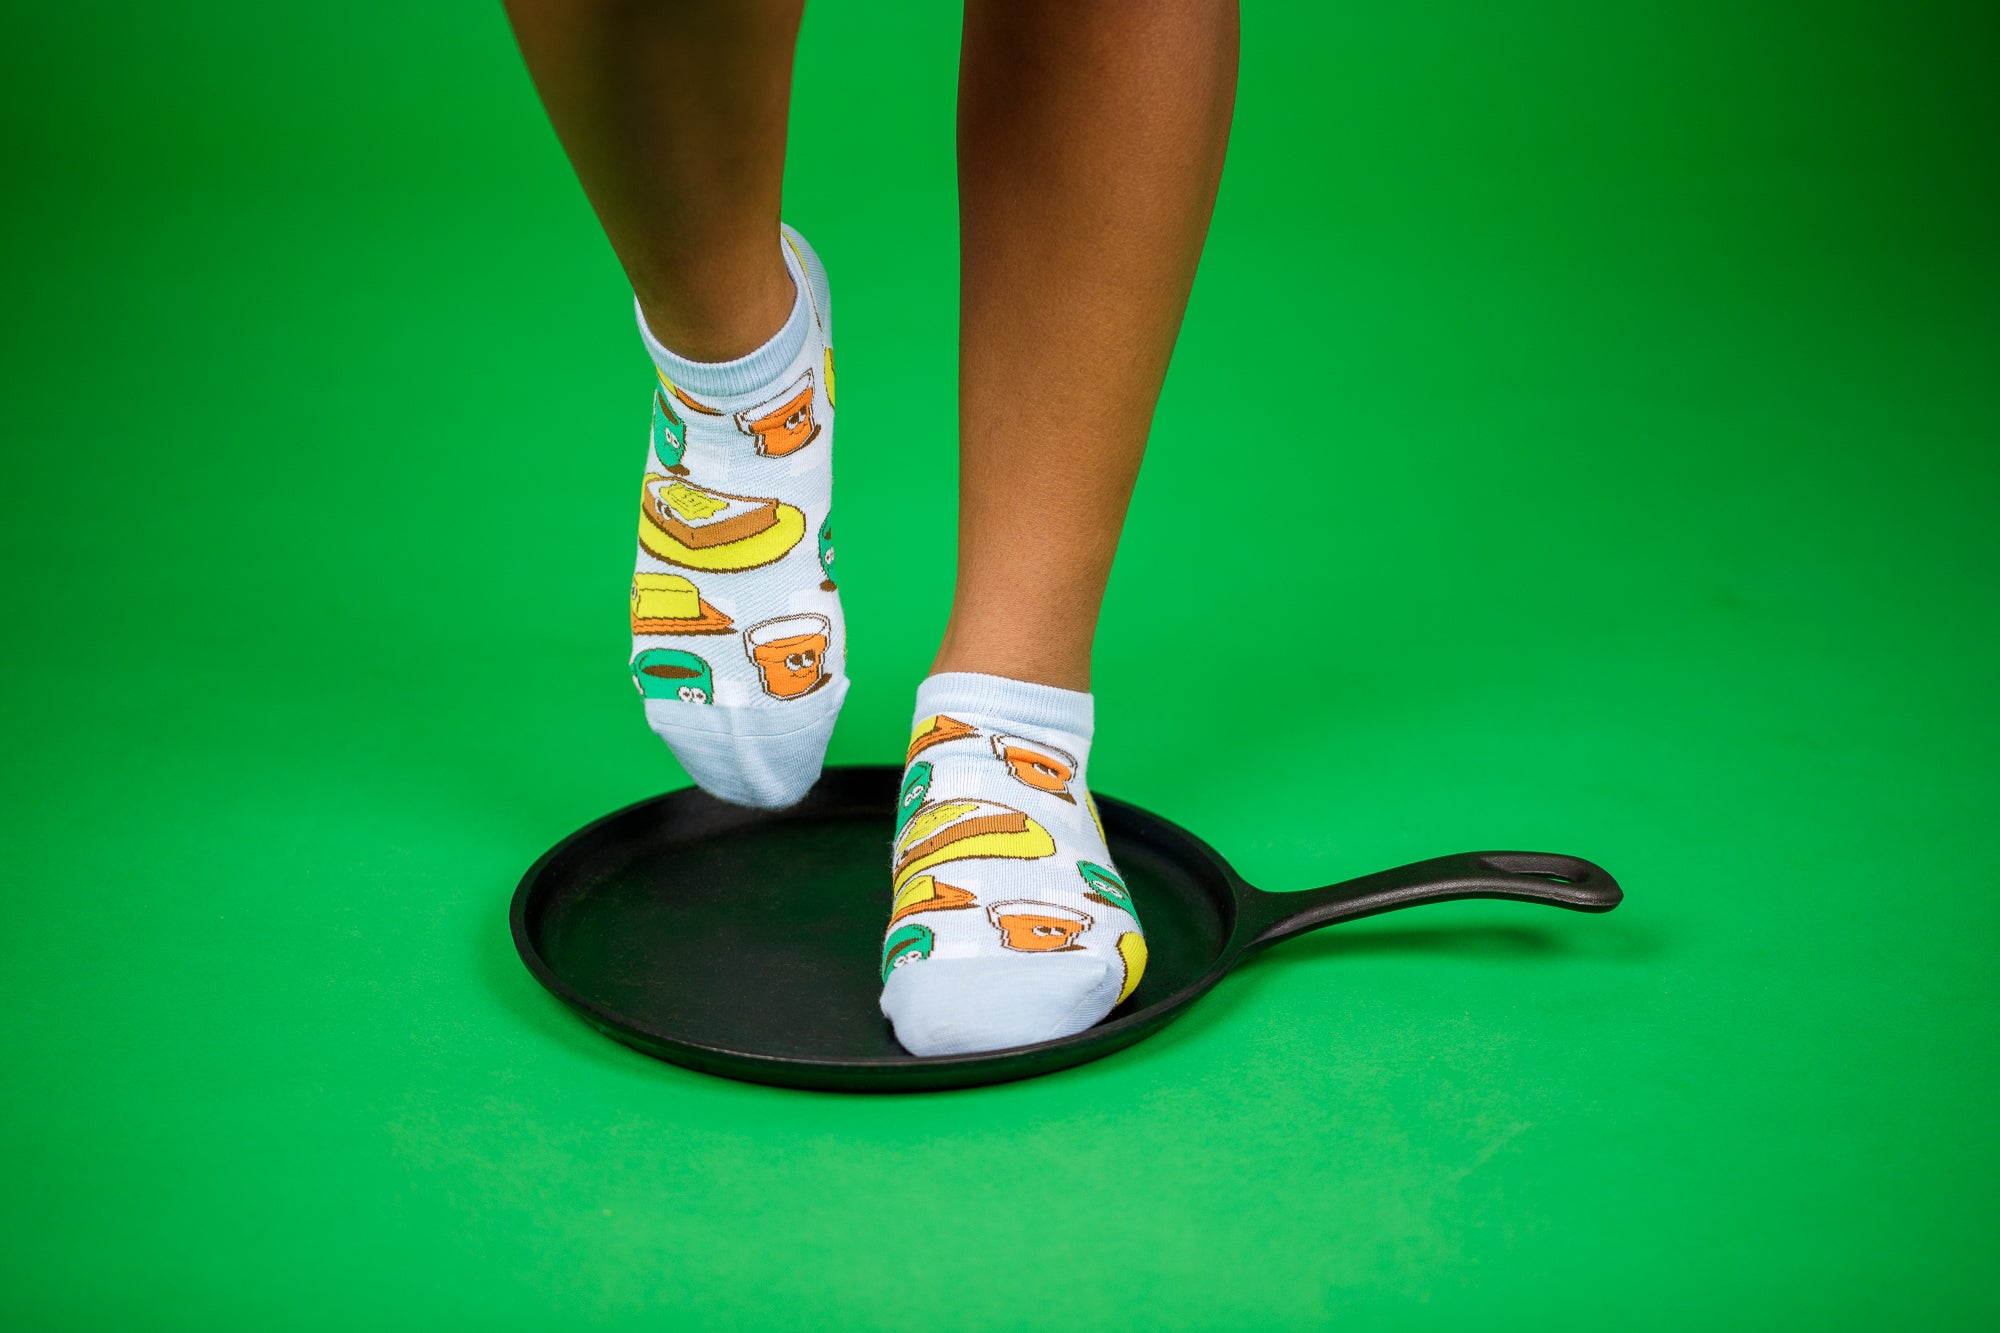 A green background showing two legs from the knee down, wearing ankle socks from the Awesome Socks Club with colorful illustrations of toast, butter and coffee. One of the feet is standing on a flat cast-iron pan.